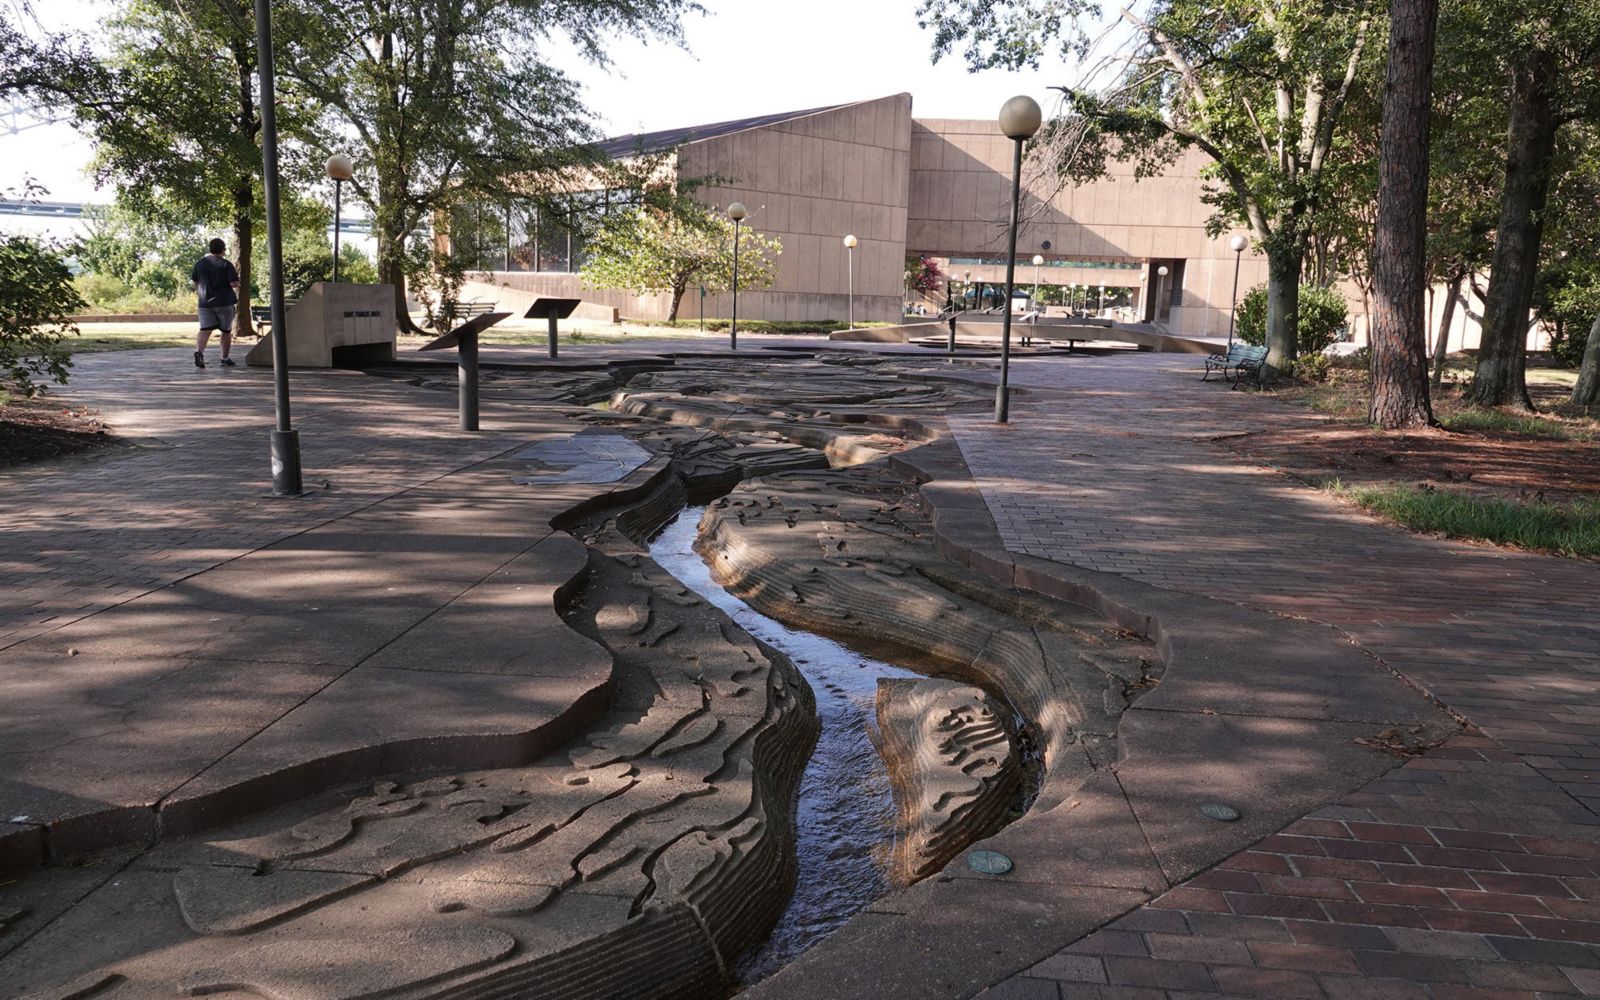 The Riverwalk, a scale model of the Mississippi River, under some trees facing a building.